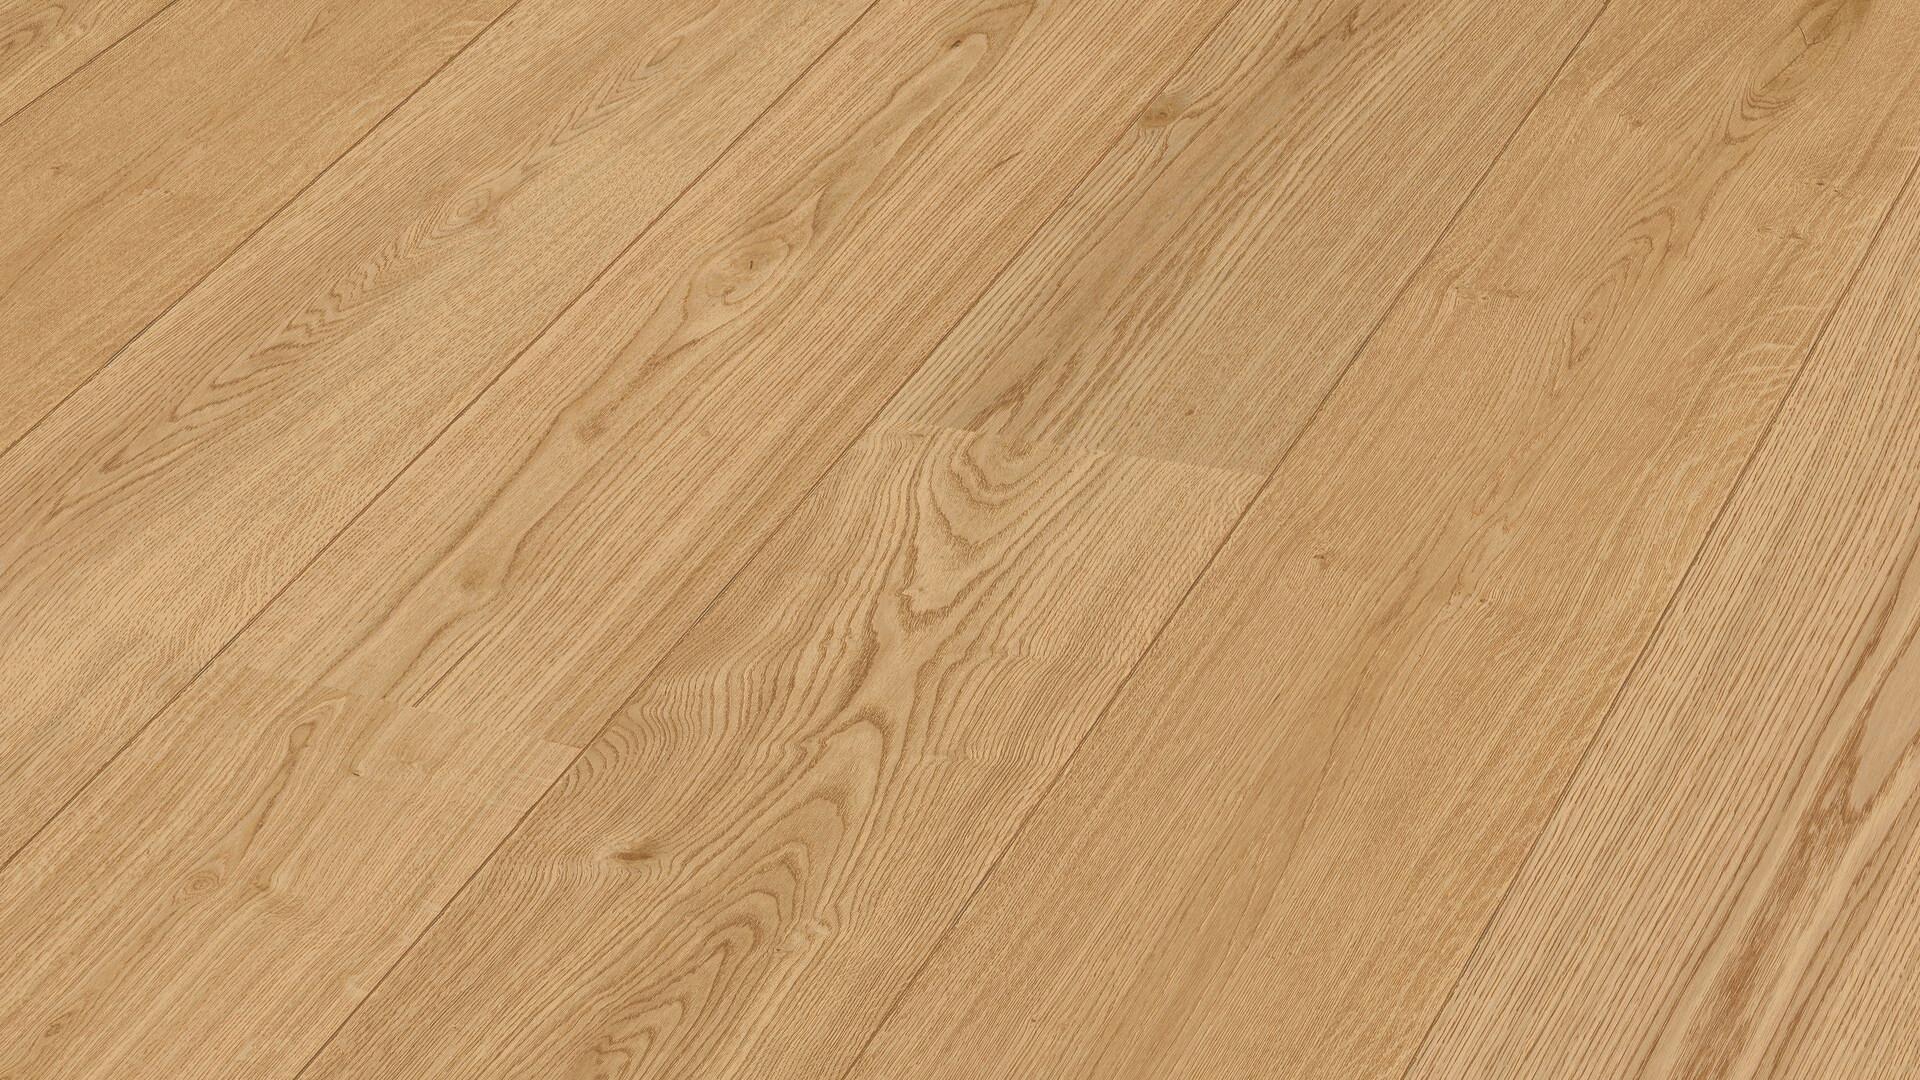 Lindura-Holzboden HD 400 Eiche authentic pure 8902